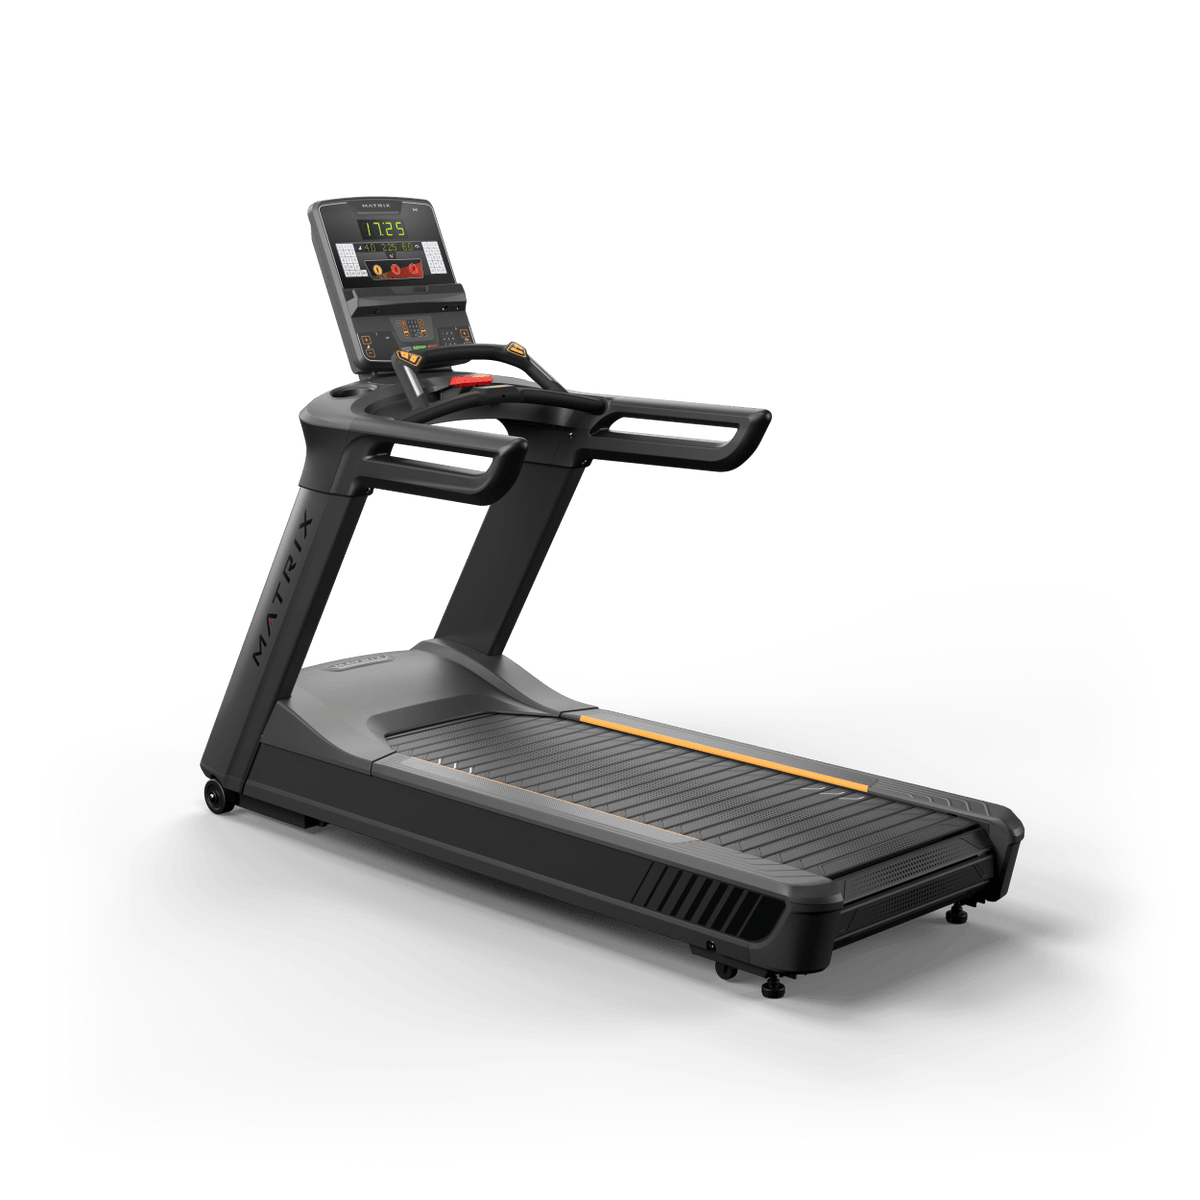 Matrix Performance Plus Treadmill with Group Training LED Console full view | Fitness Experience